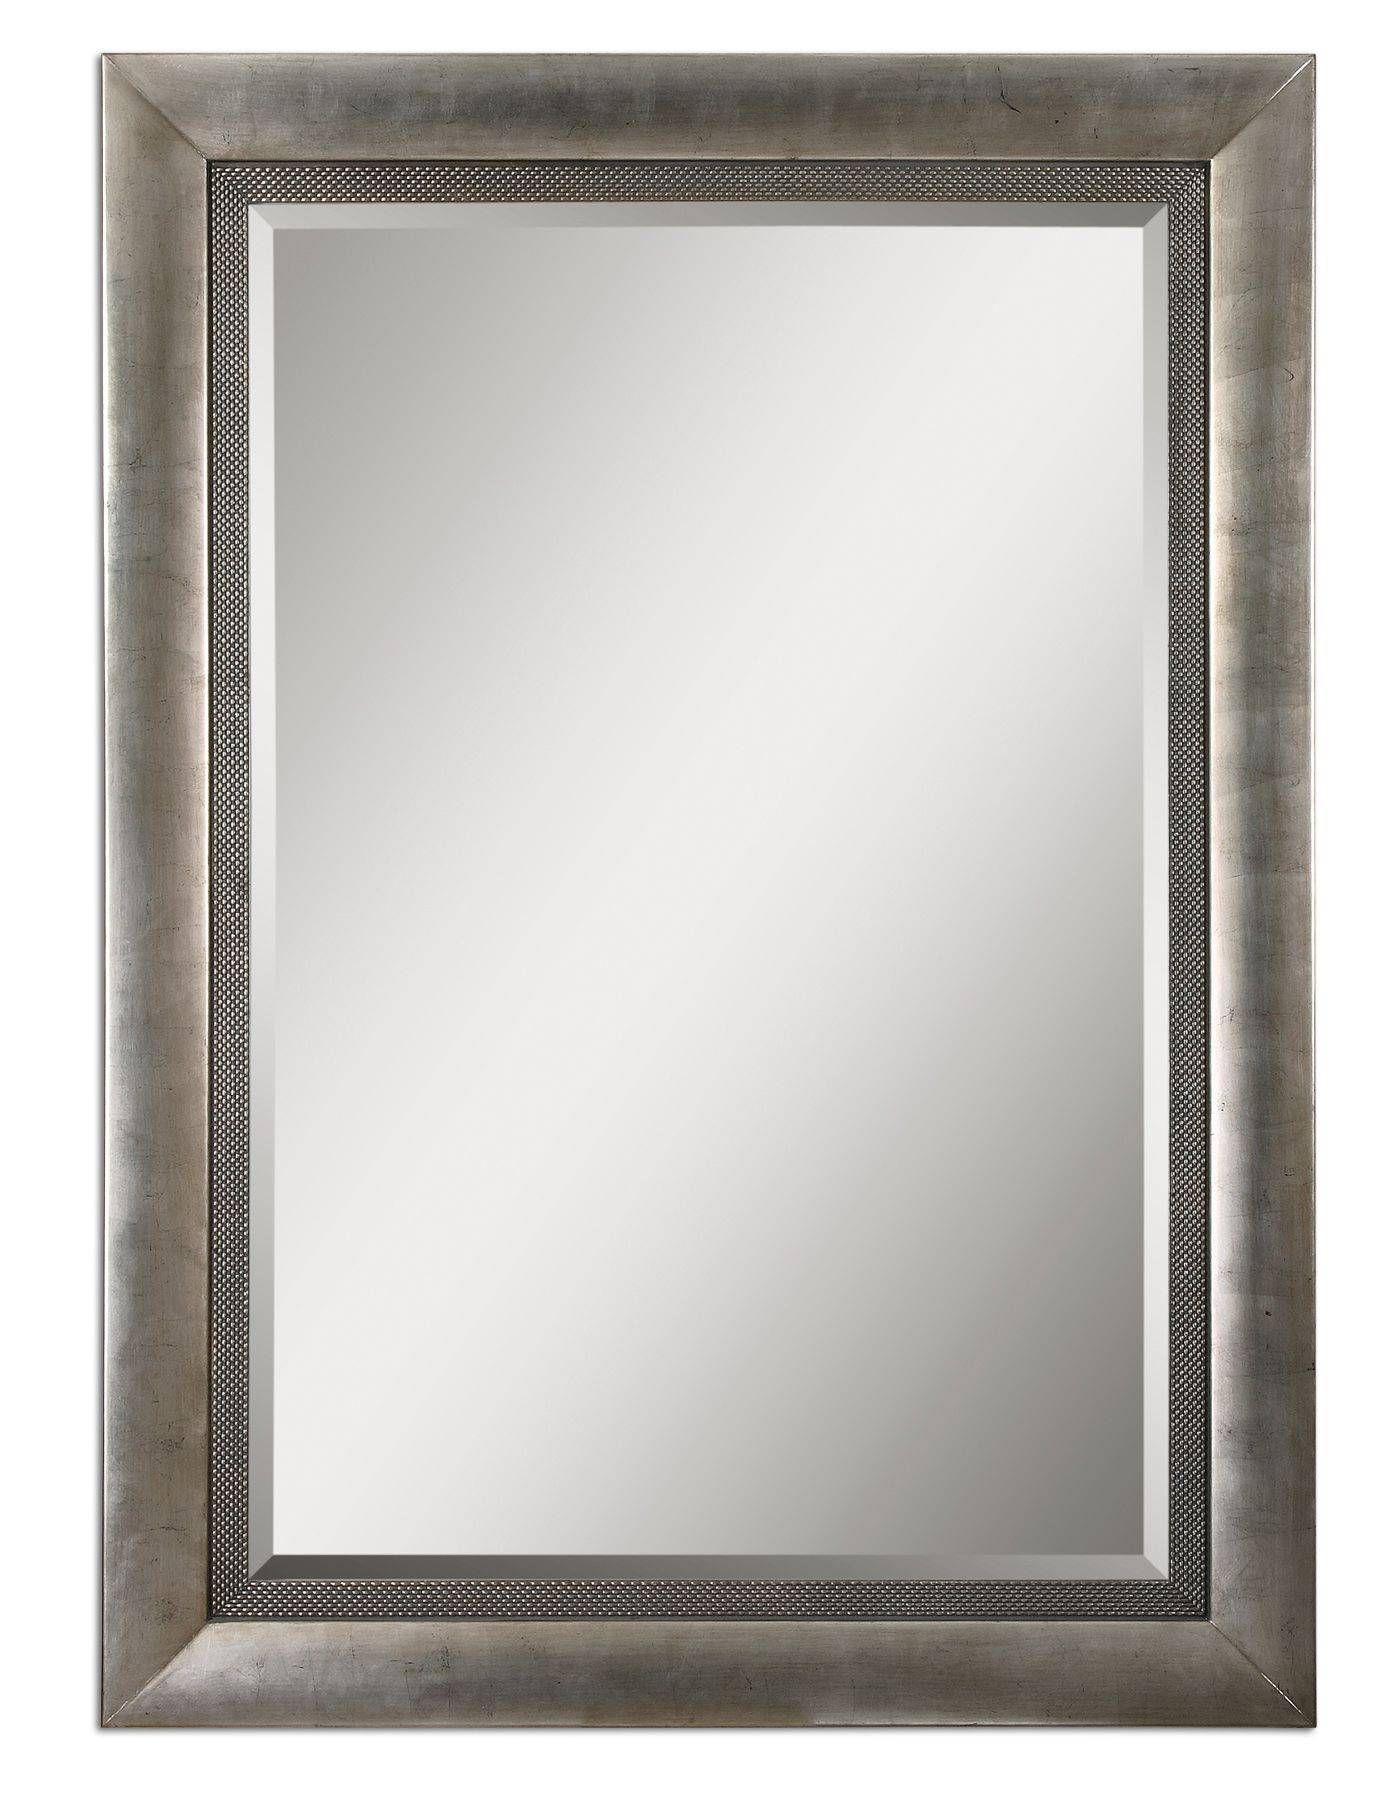 Uttermost Gilford Antique Silver Mirror 14207 With Antique Silver Mirrors (View 3 of 15)